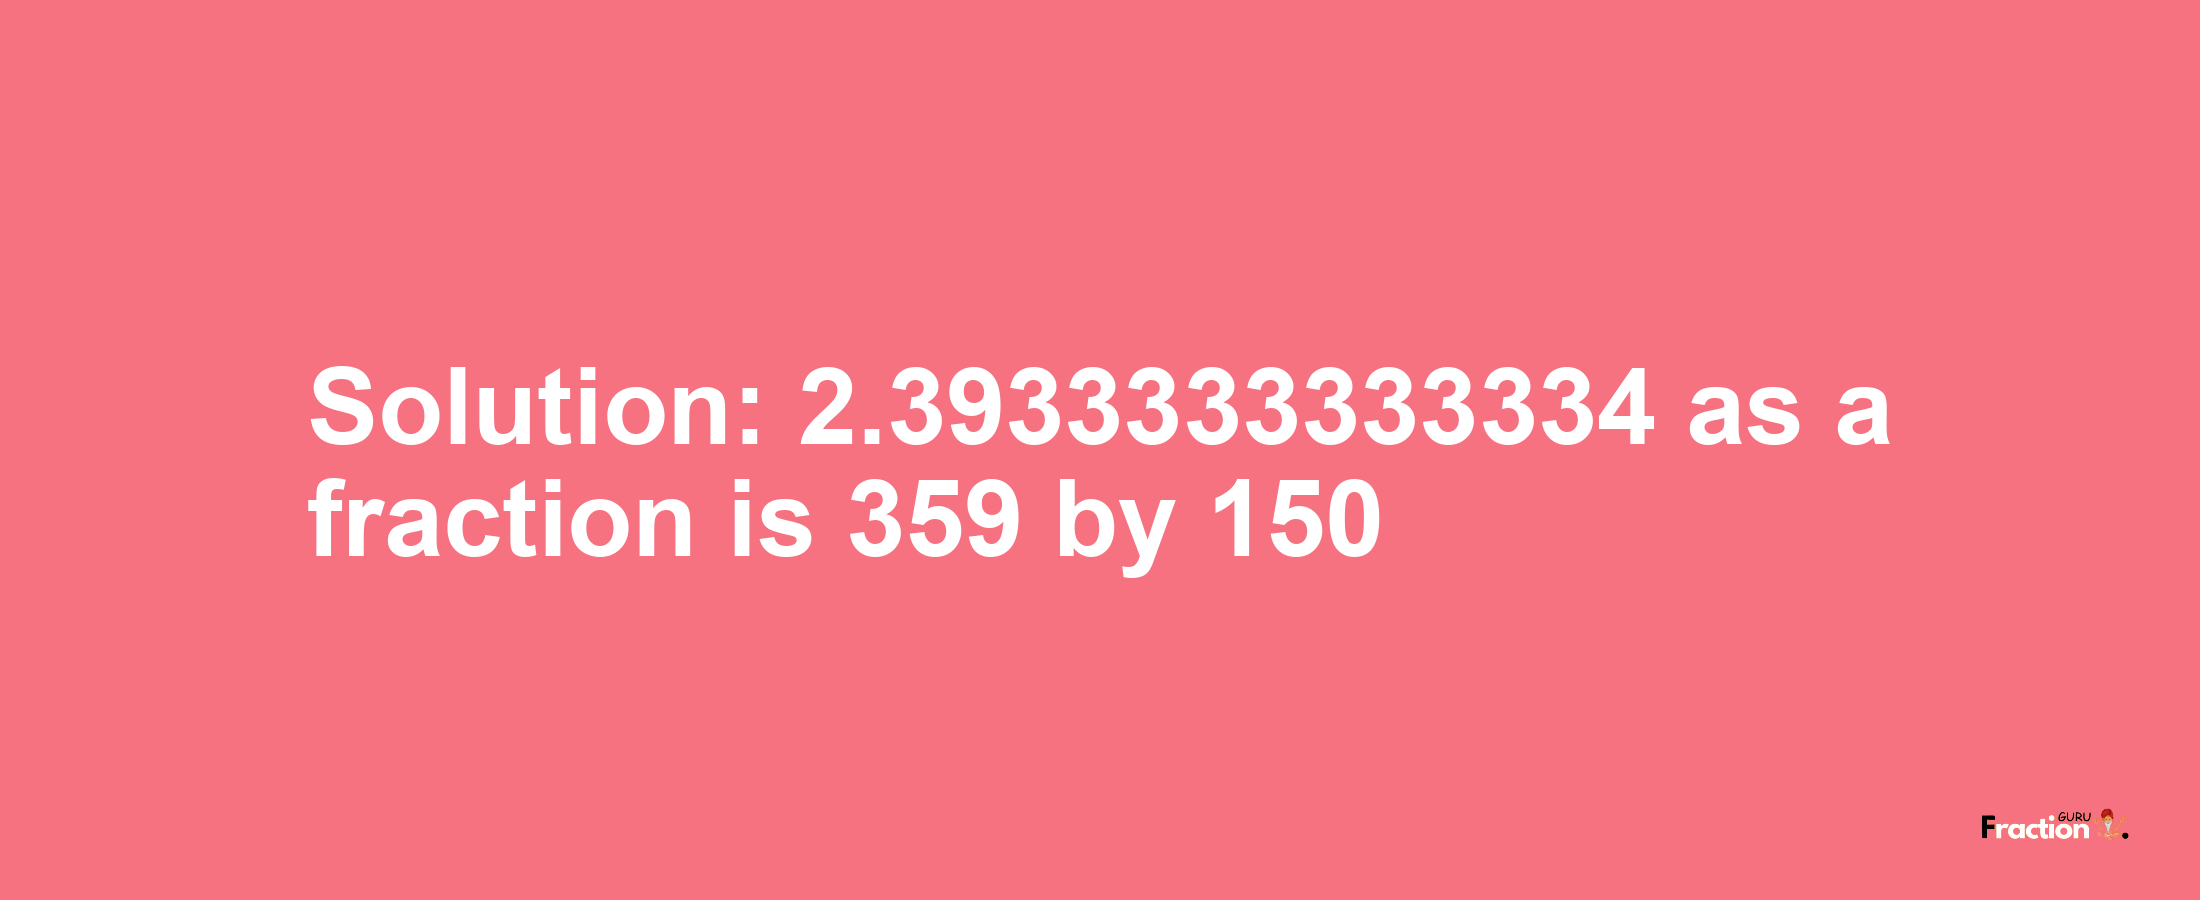 Solution:2.3933333333334 as a fraction is 359/150